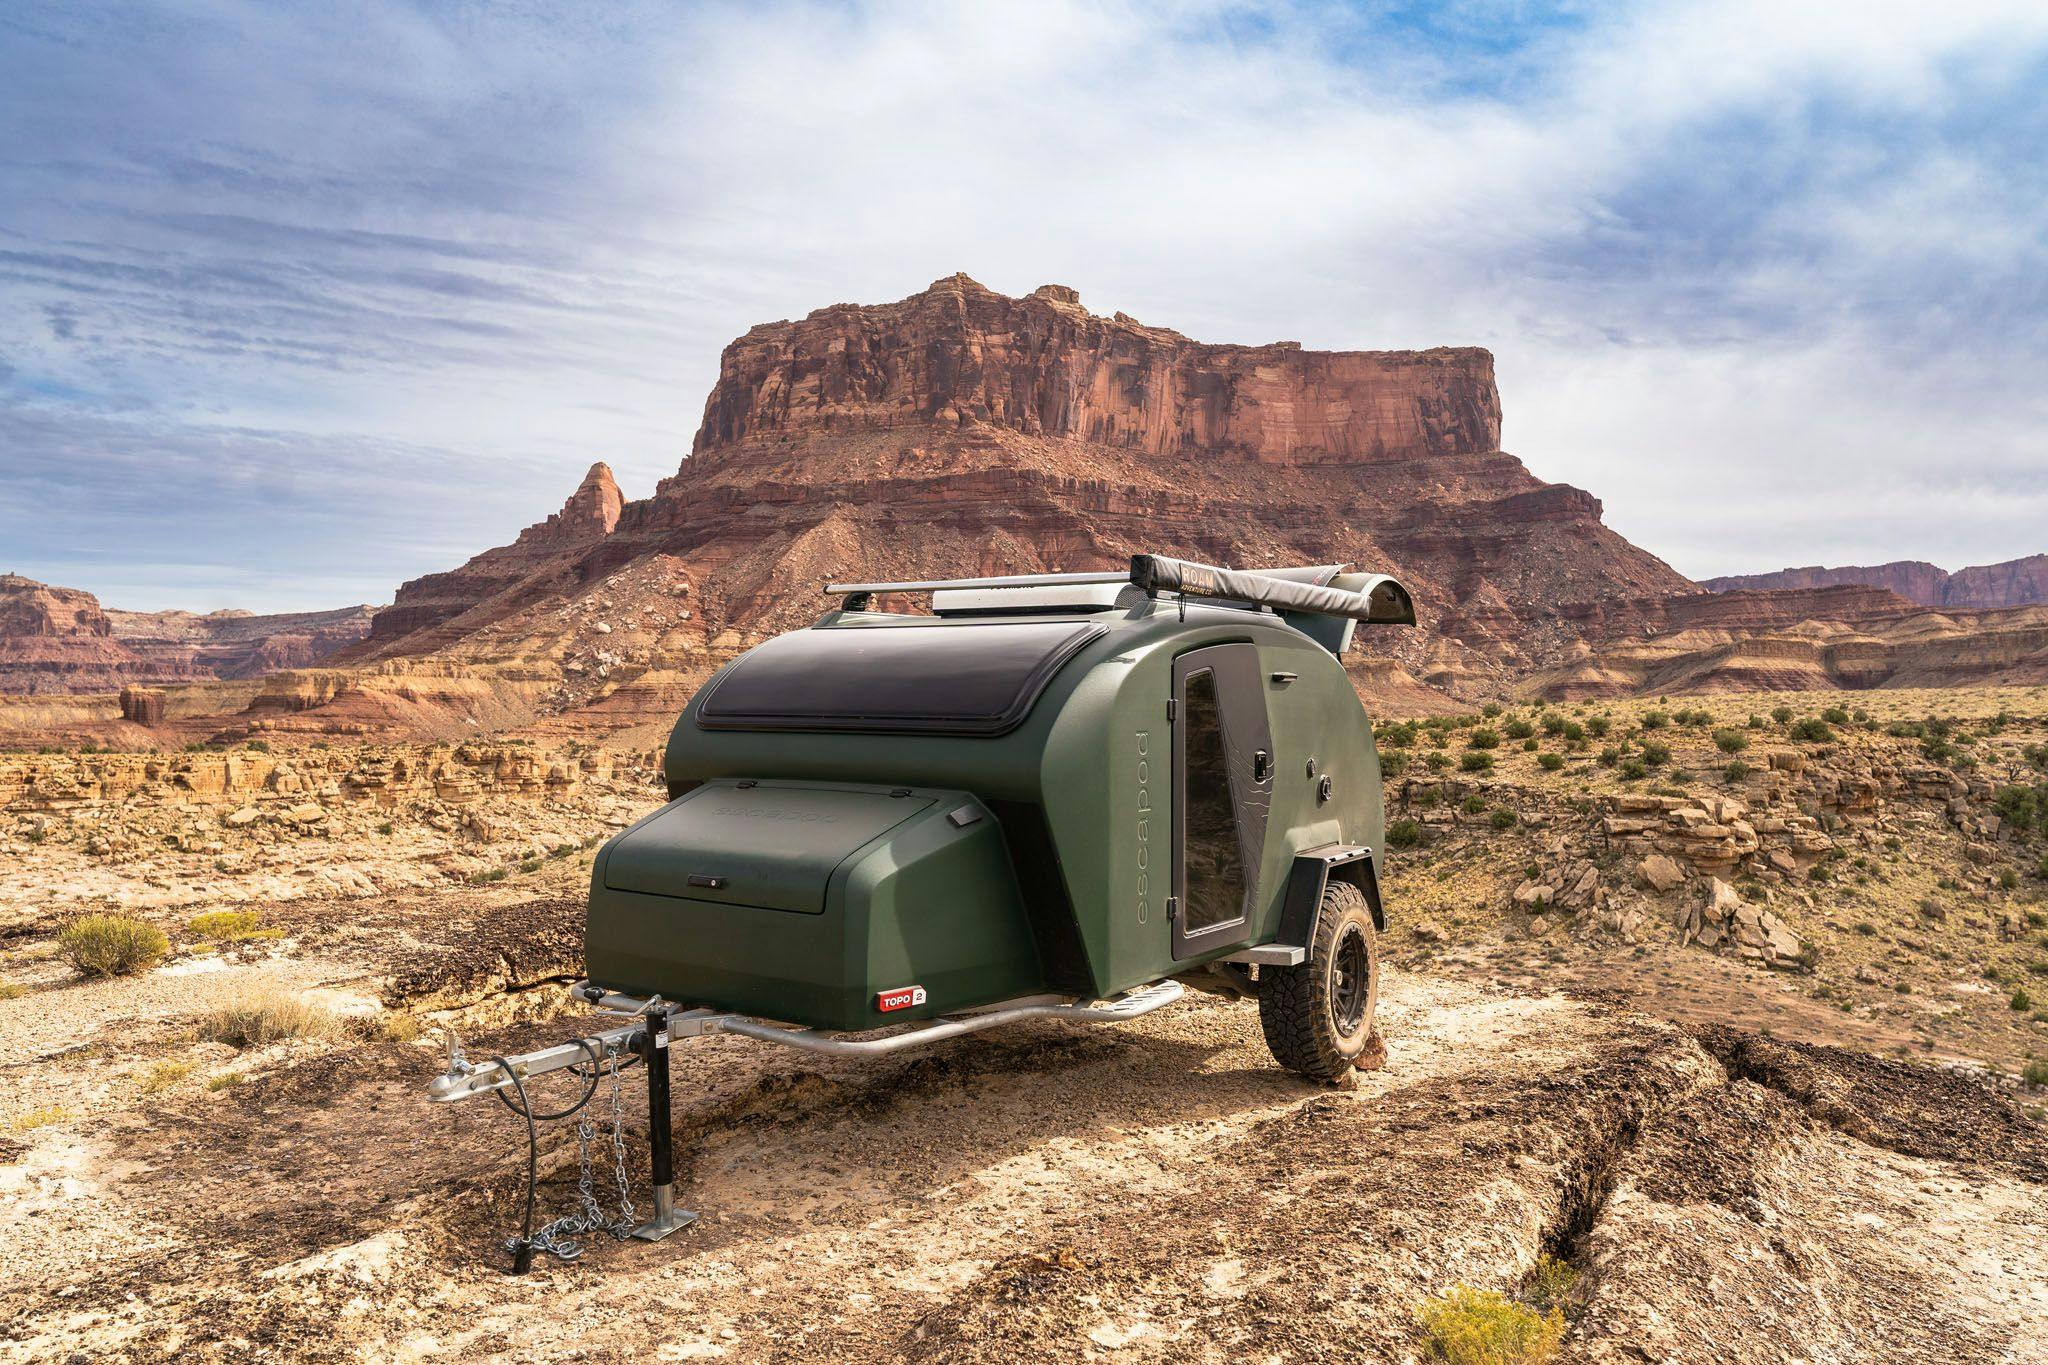 A green TOPO2 fiberglass trailer is parked on a rocky outcropping with a backdrop of a red rock mesa in the distance.